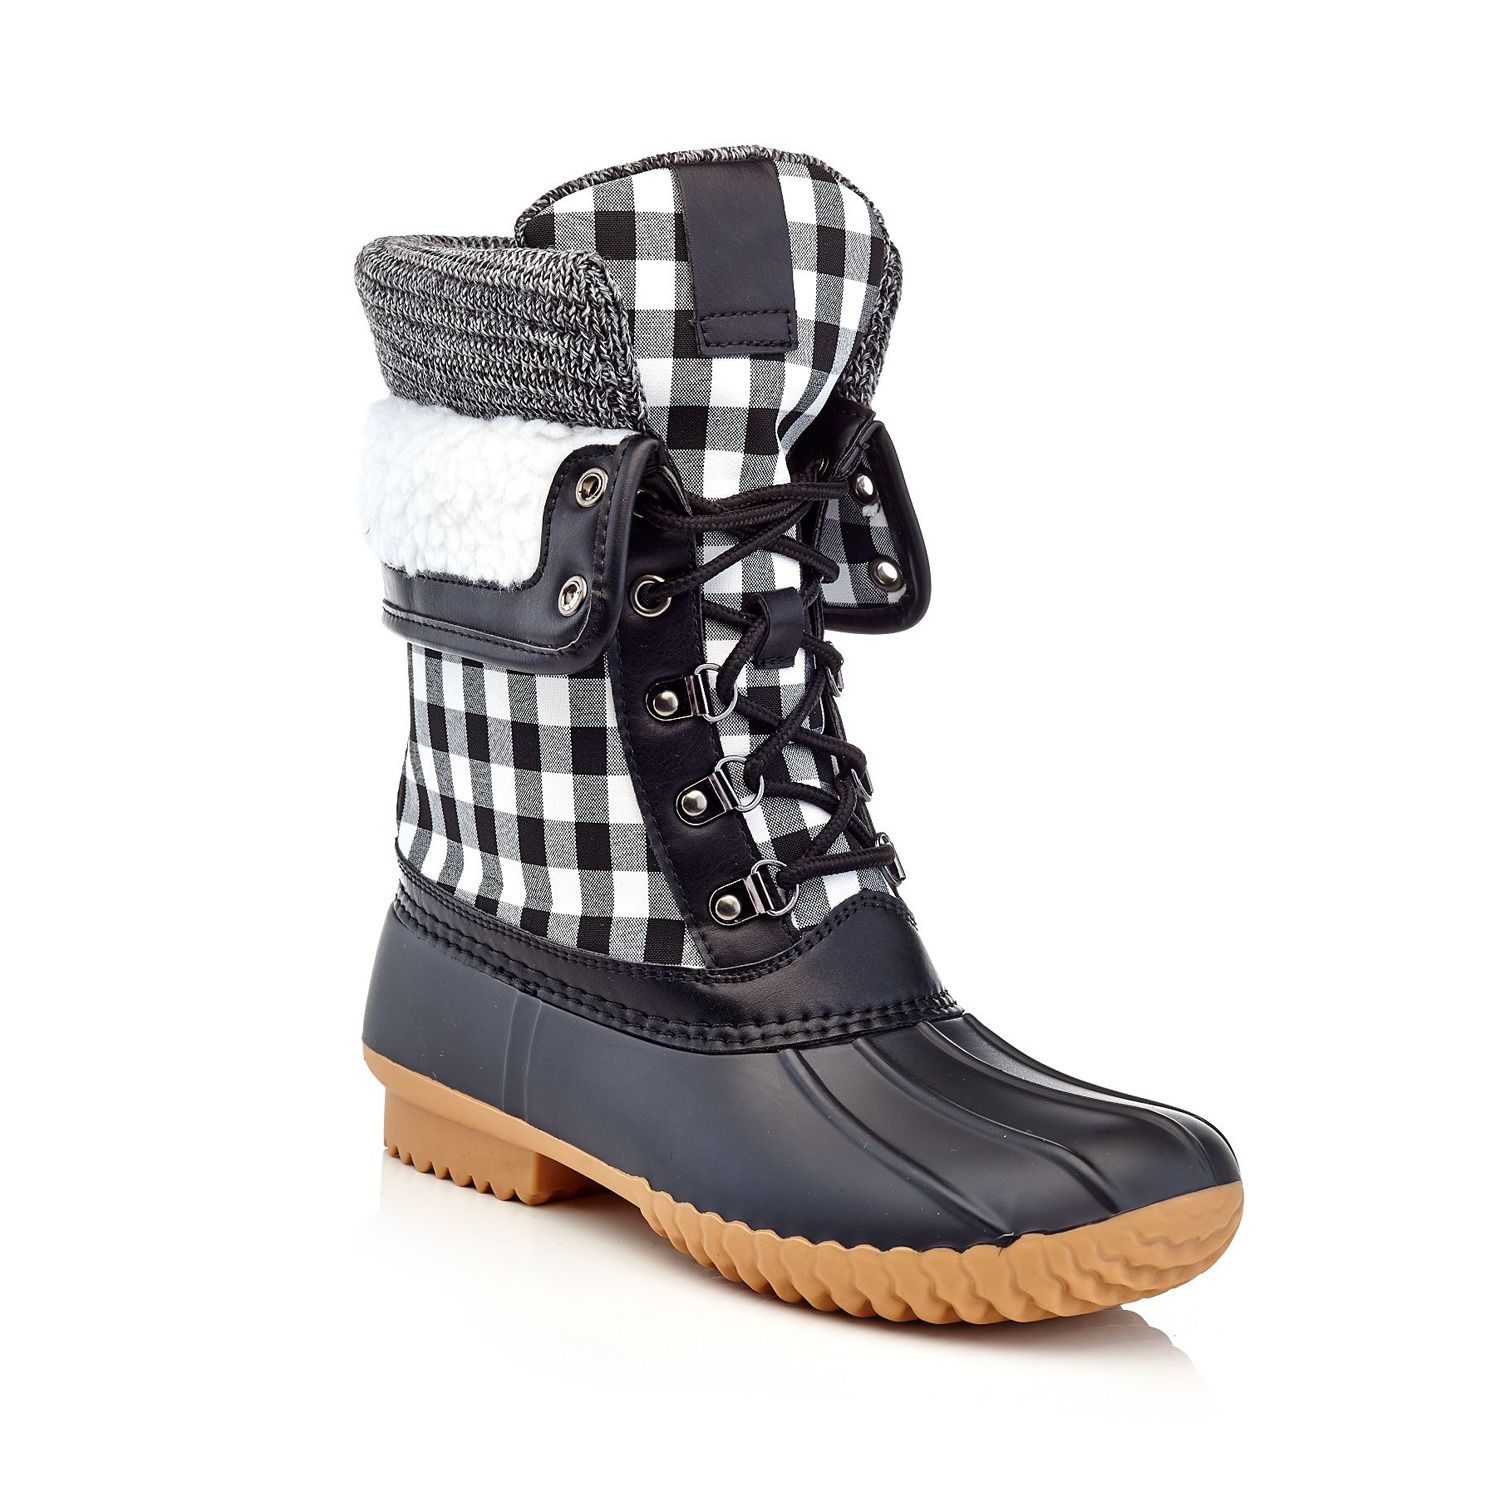 Image for Henry Ferrera Mission 18 Women's Water-Resistant Winter Boots at Kohl's.